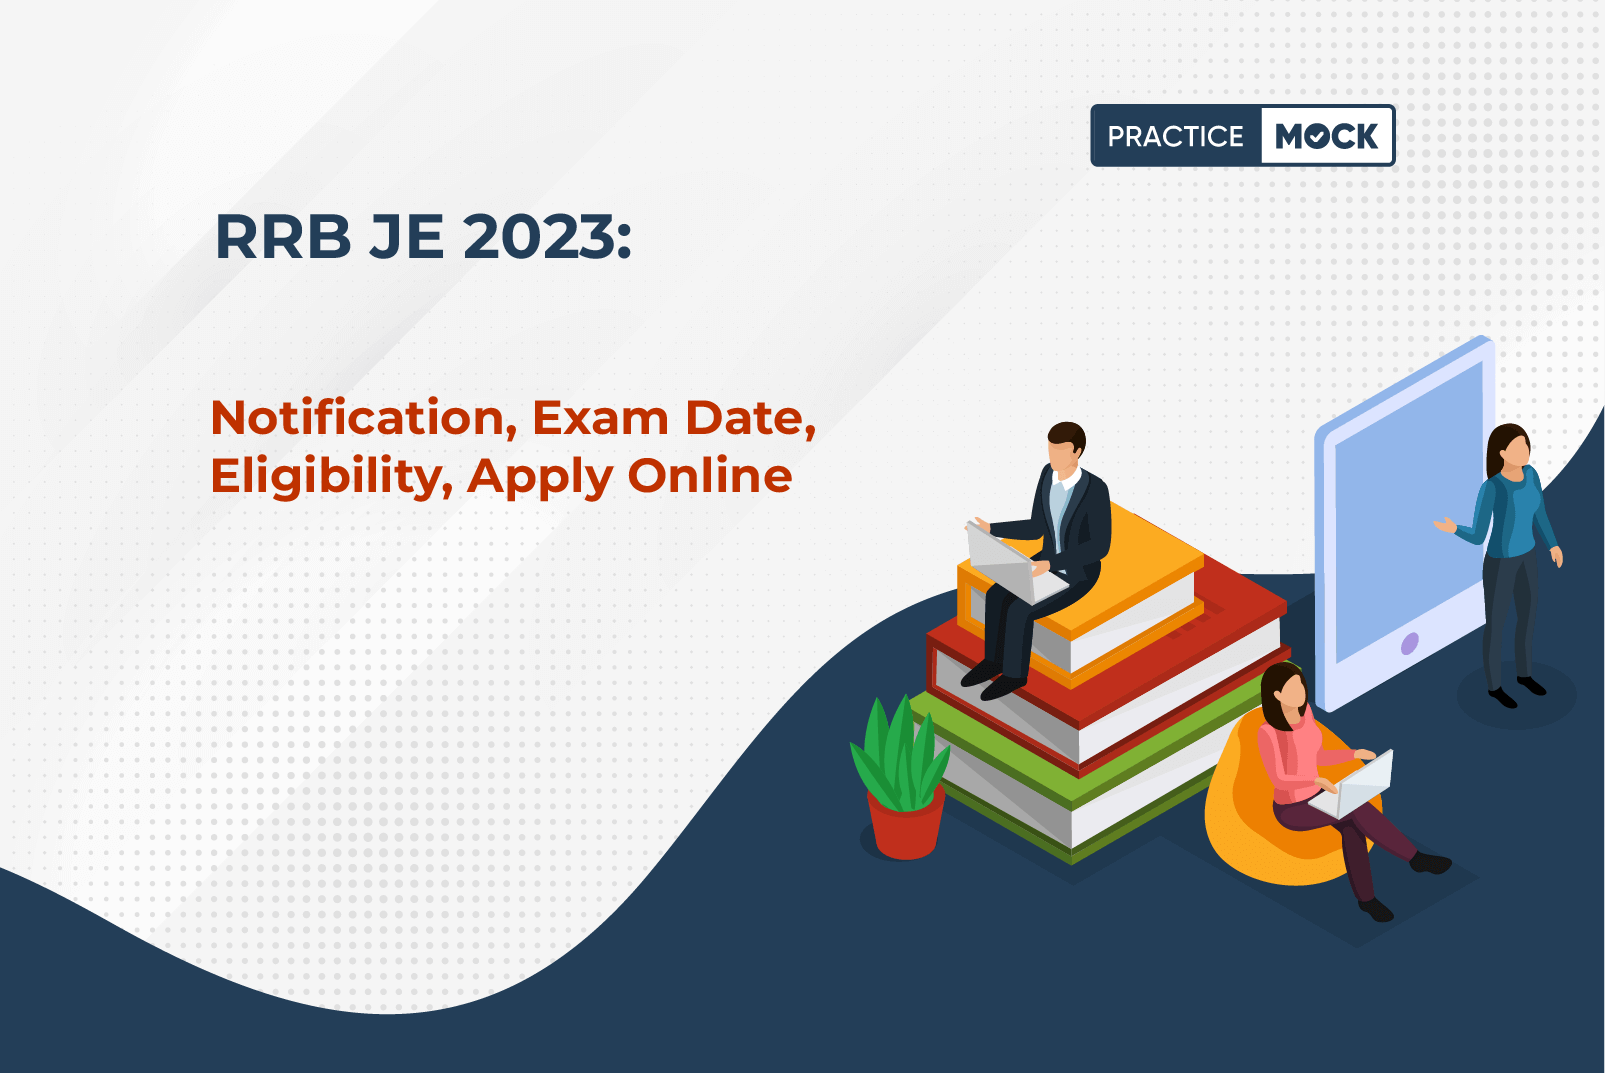 RRB JE 2023: Notification, Exam Date, Eligibility, Apply Online